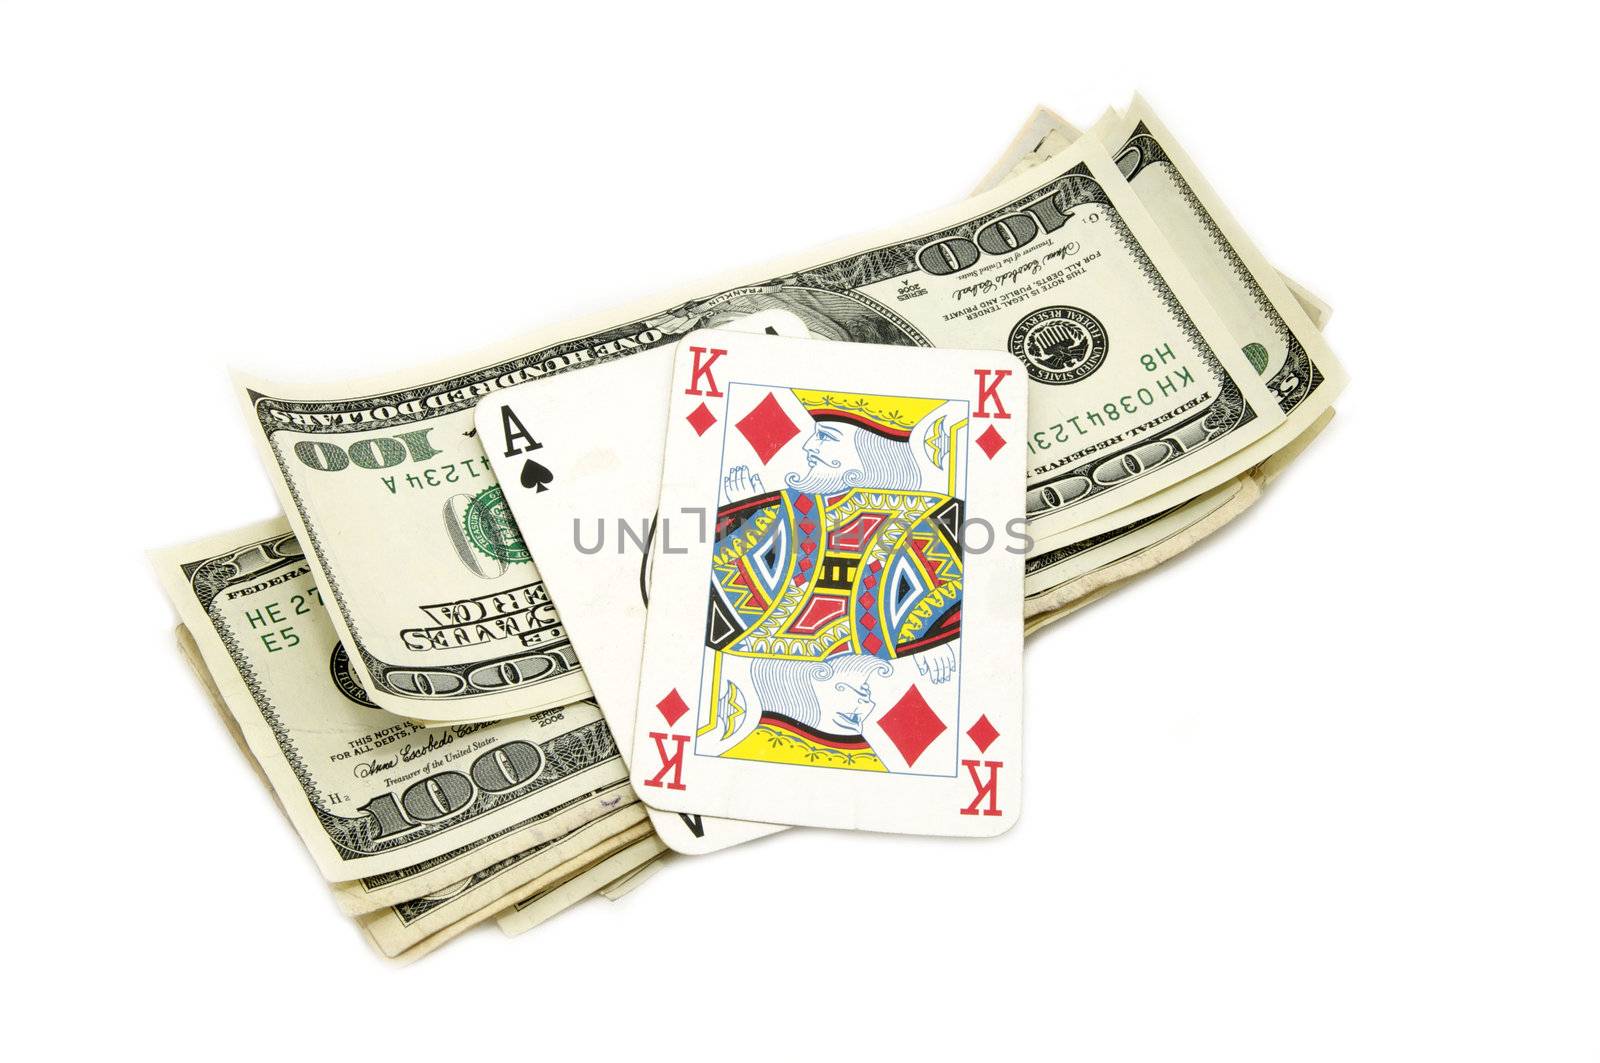 Dollars and playing cards on white background